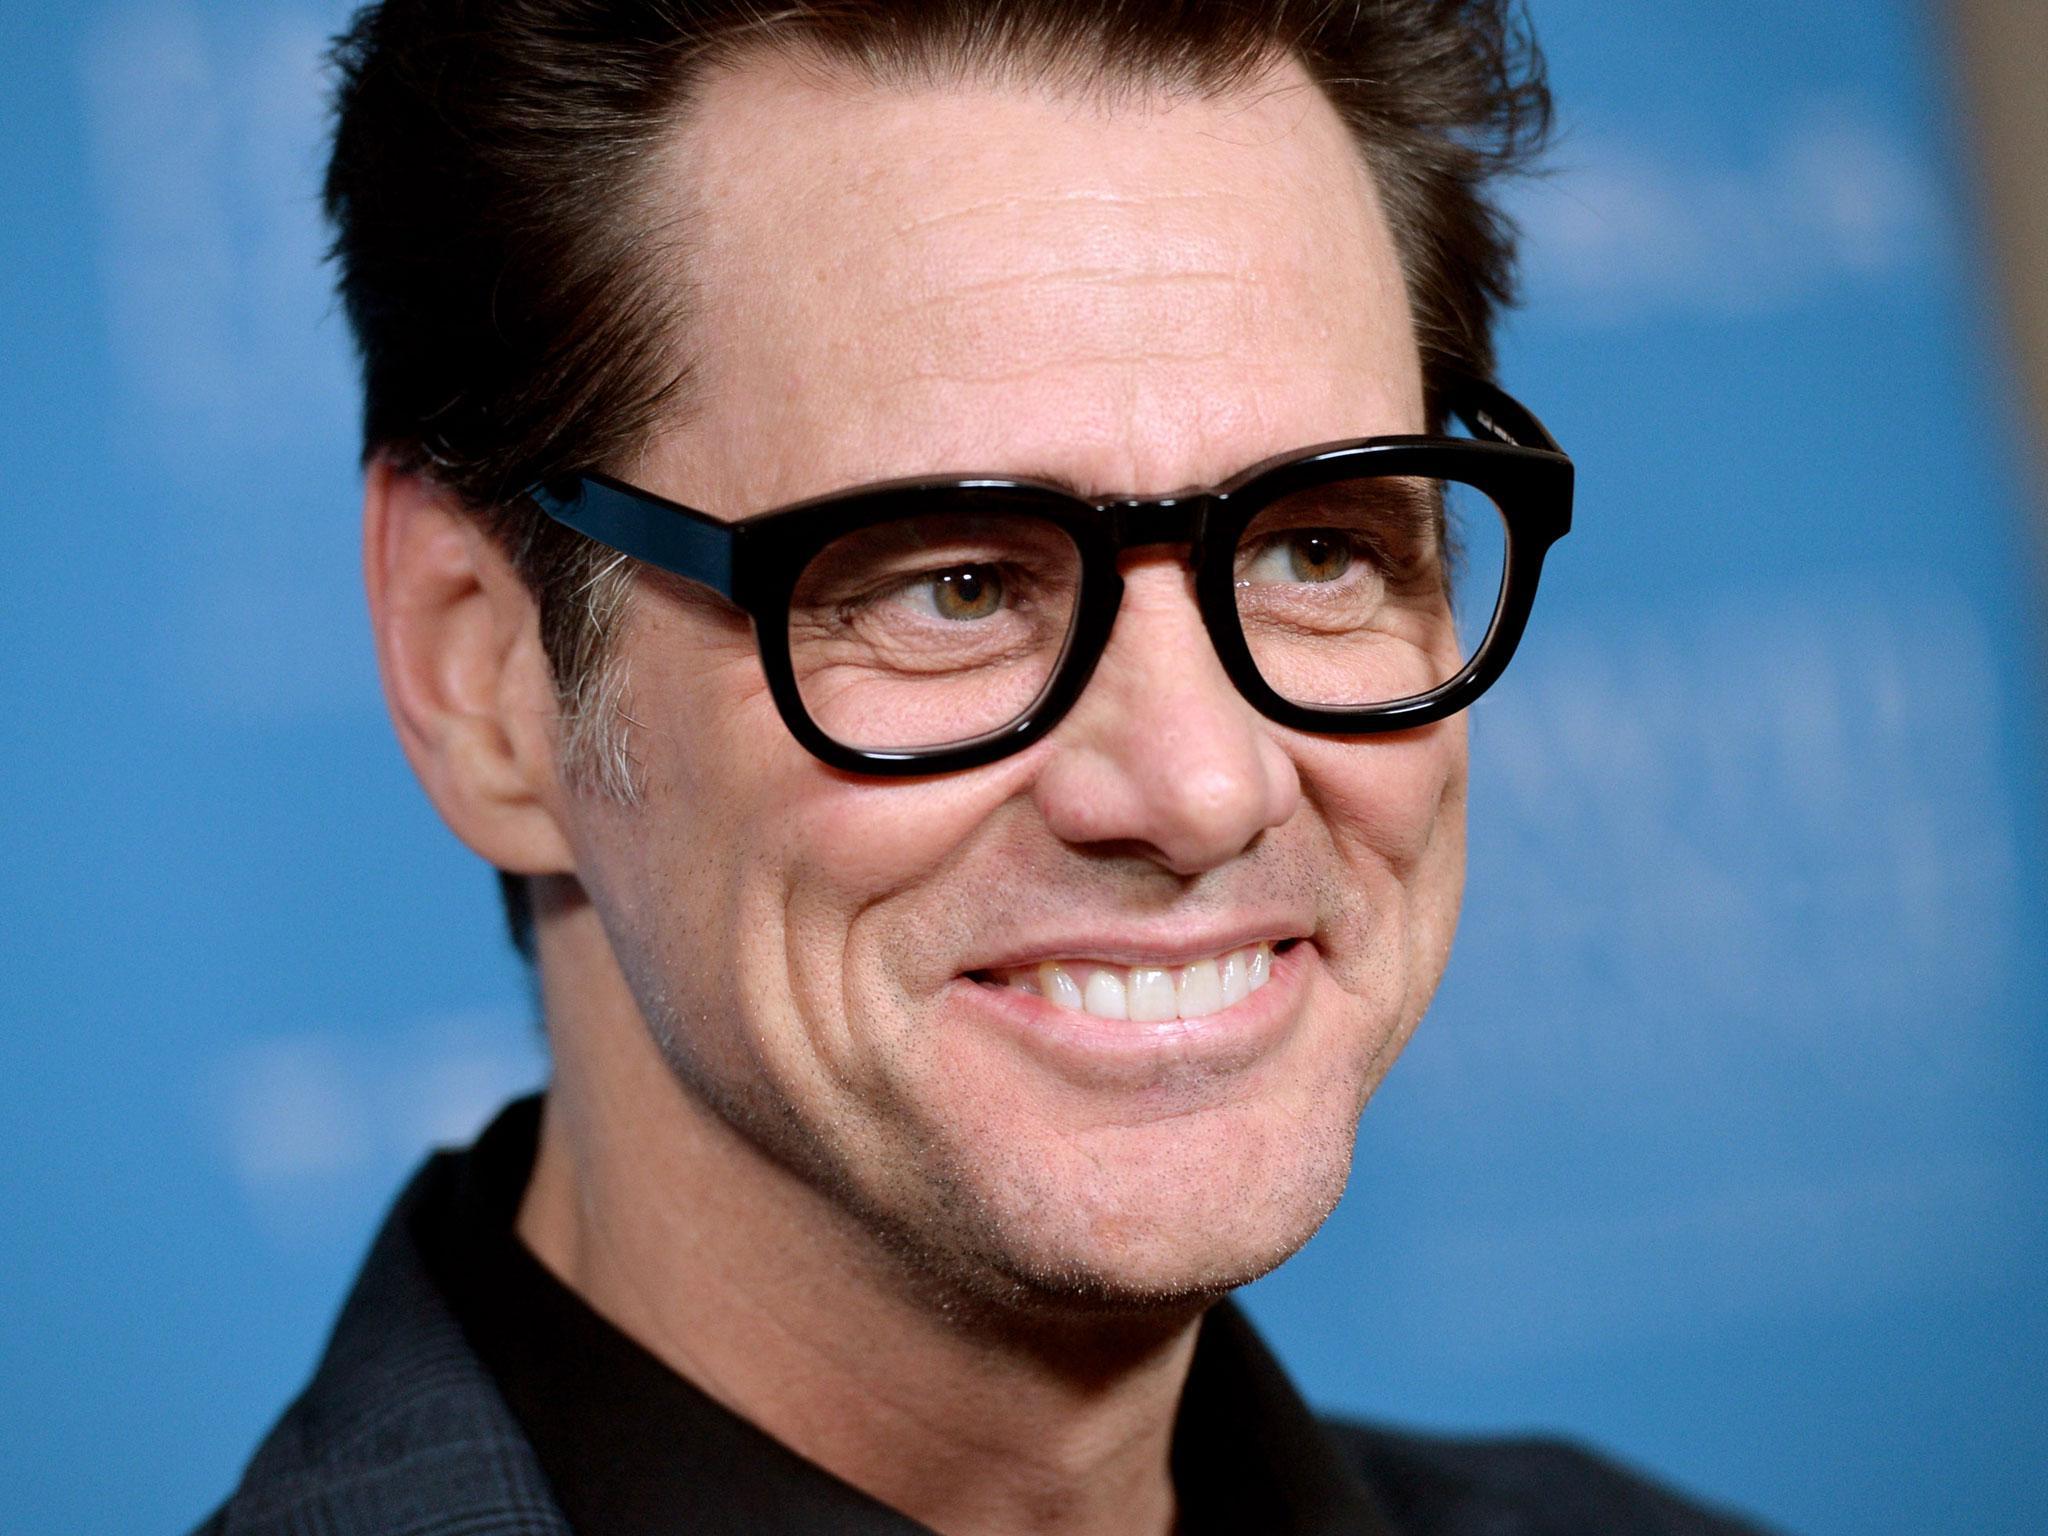 Jim Carrey launched a furious rant about vaccines this week